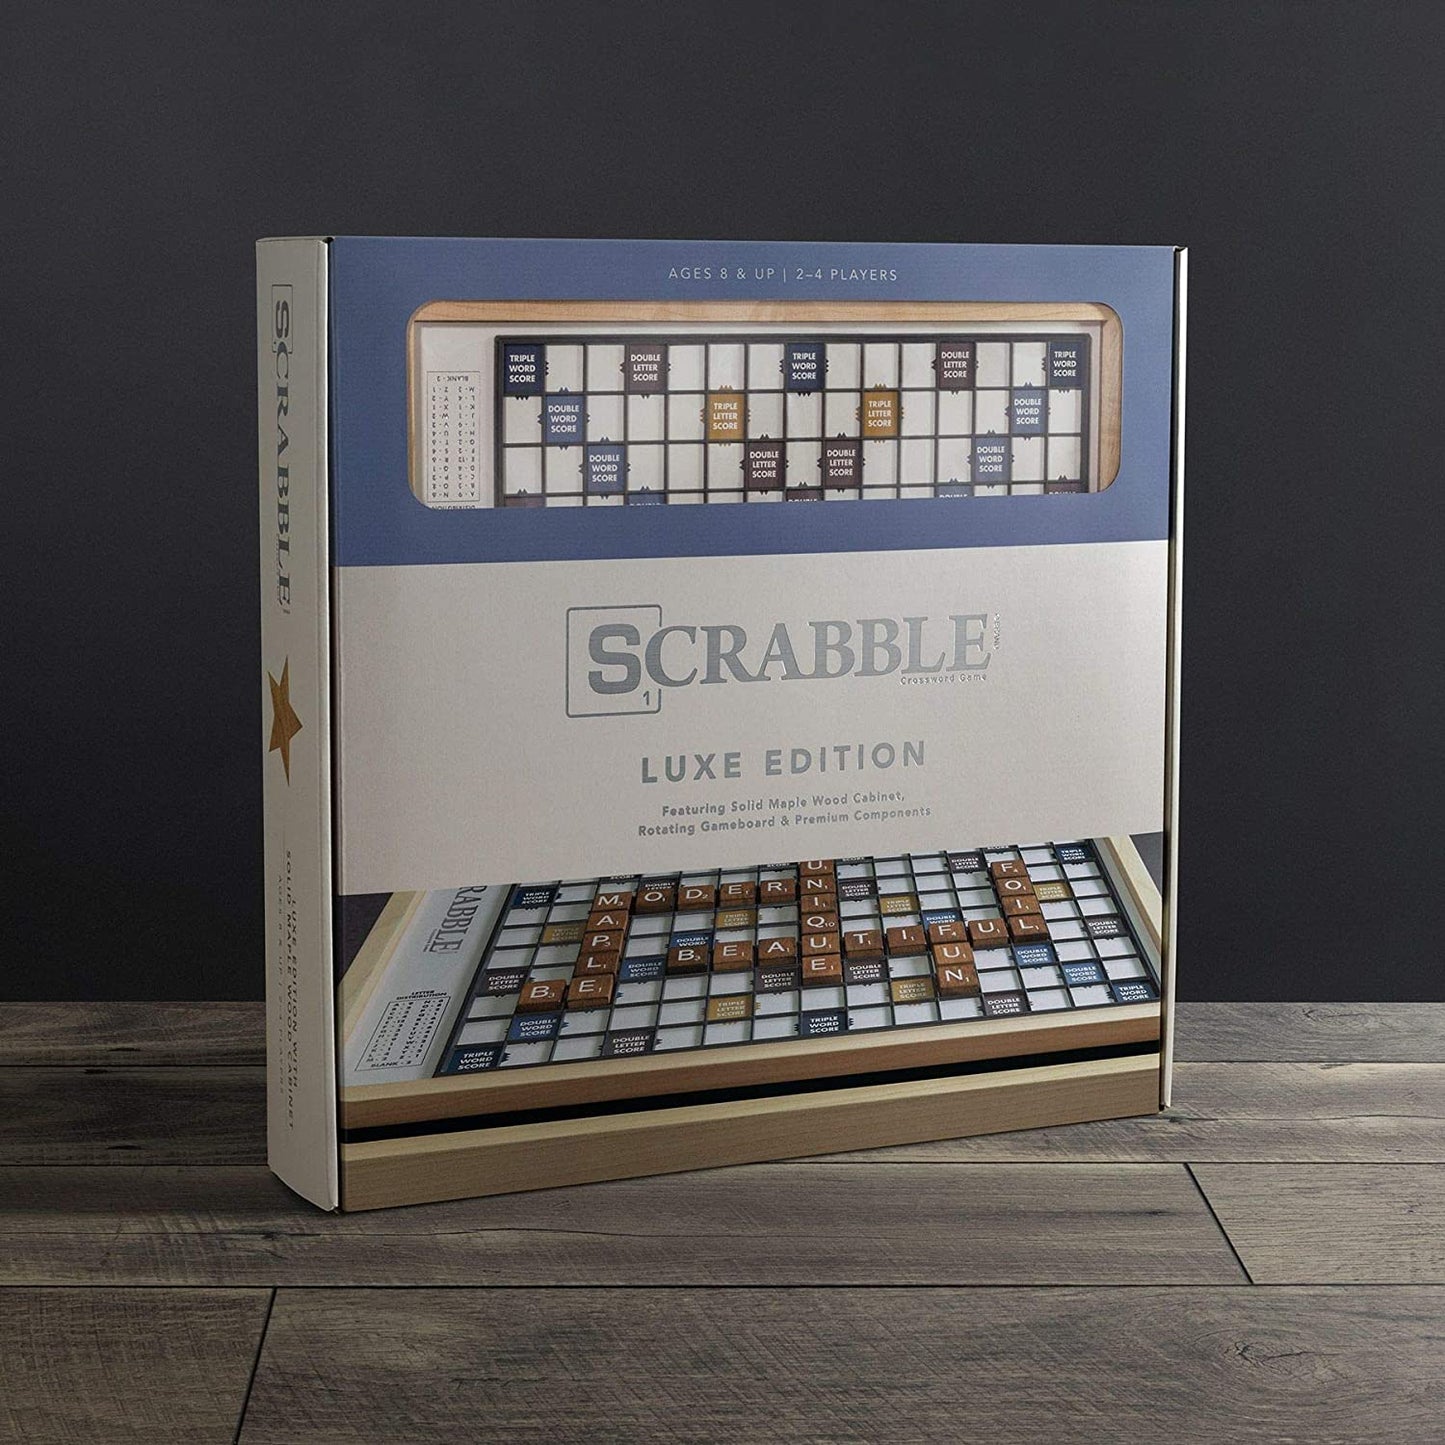 The packaging for the luxe edition of Scrabble.